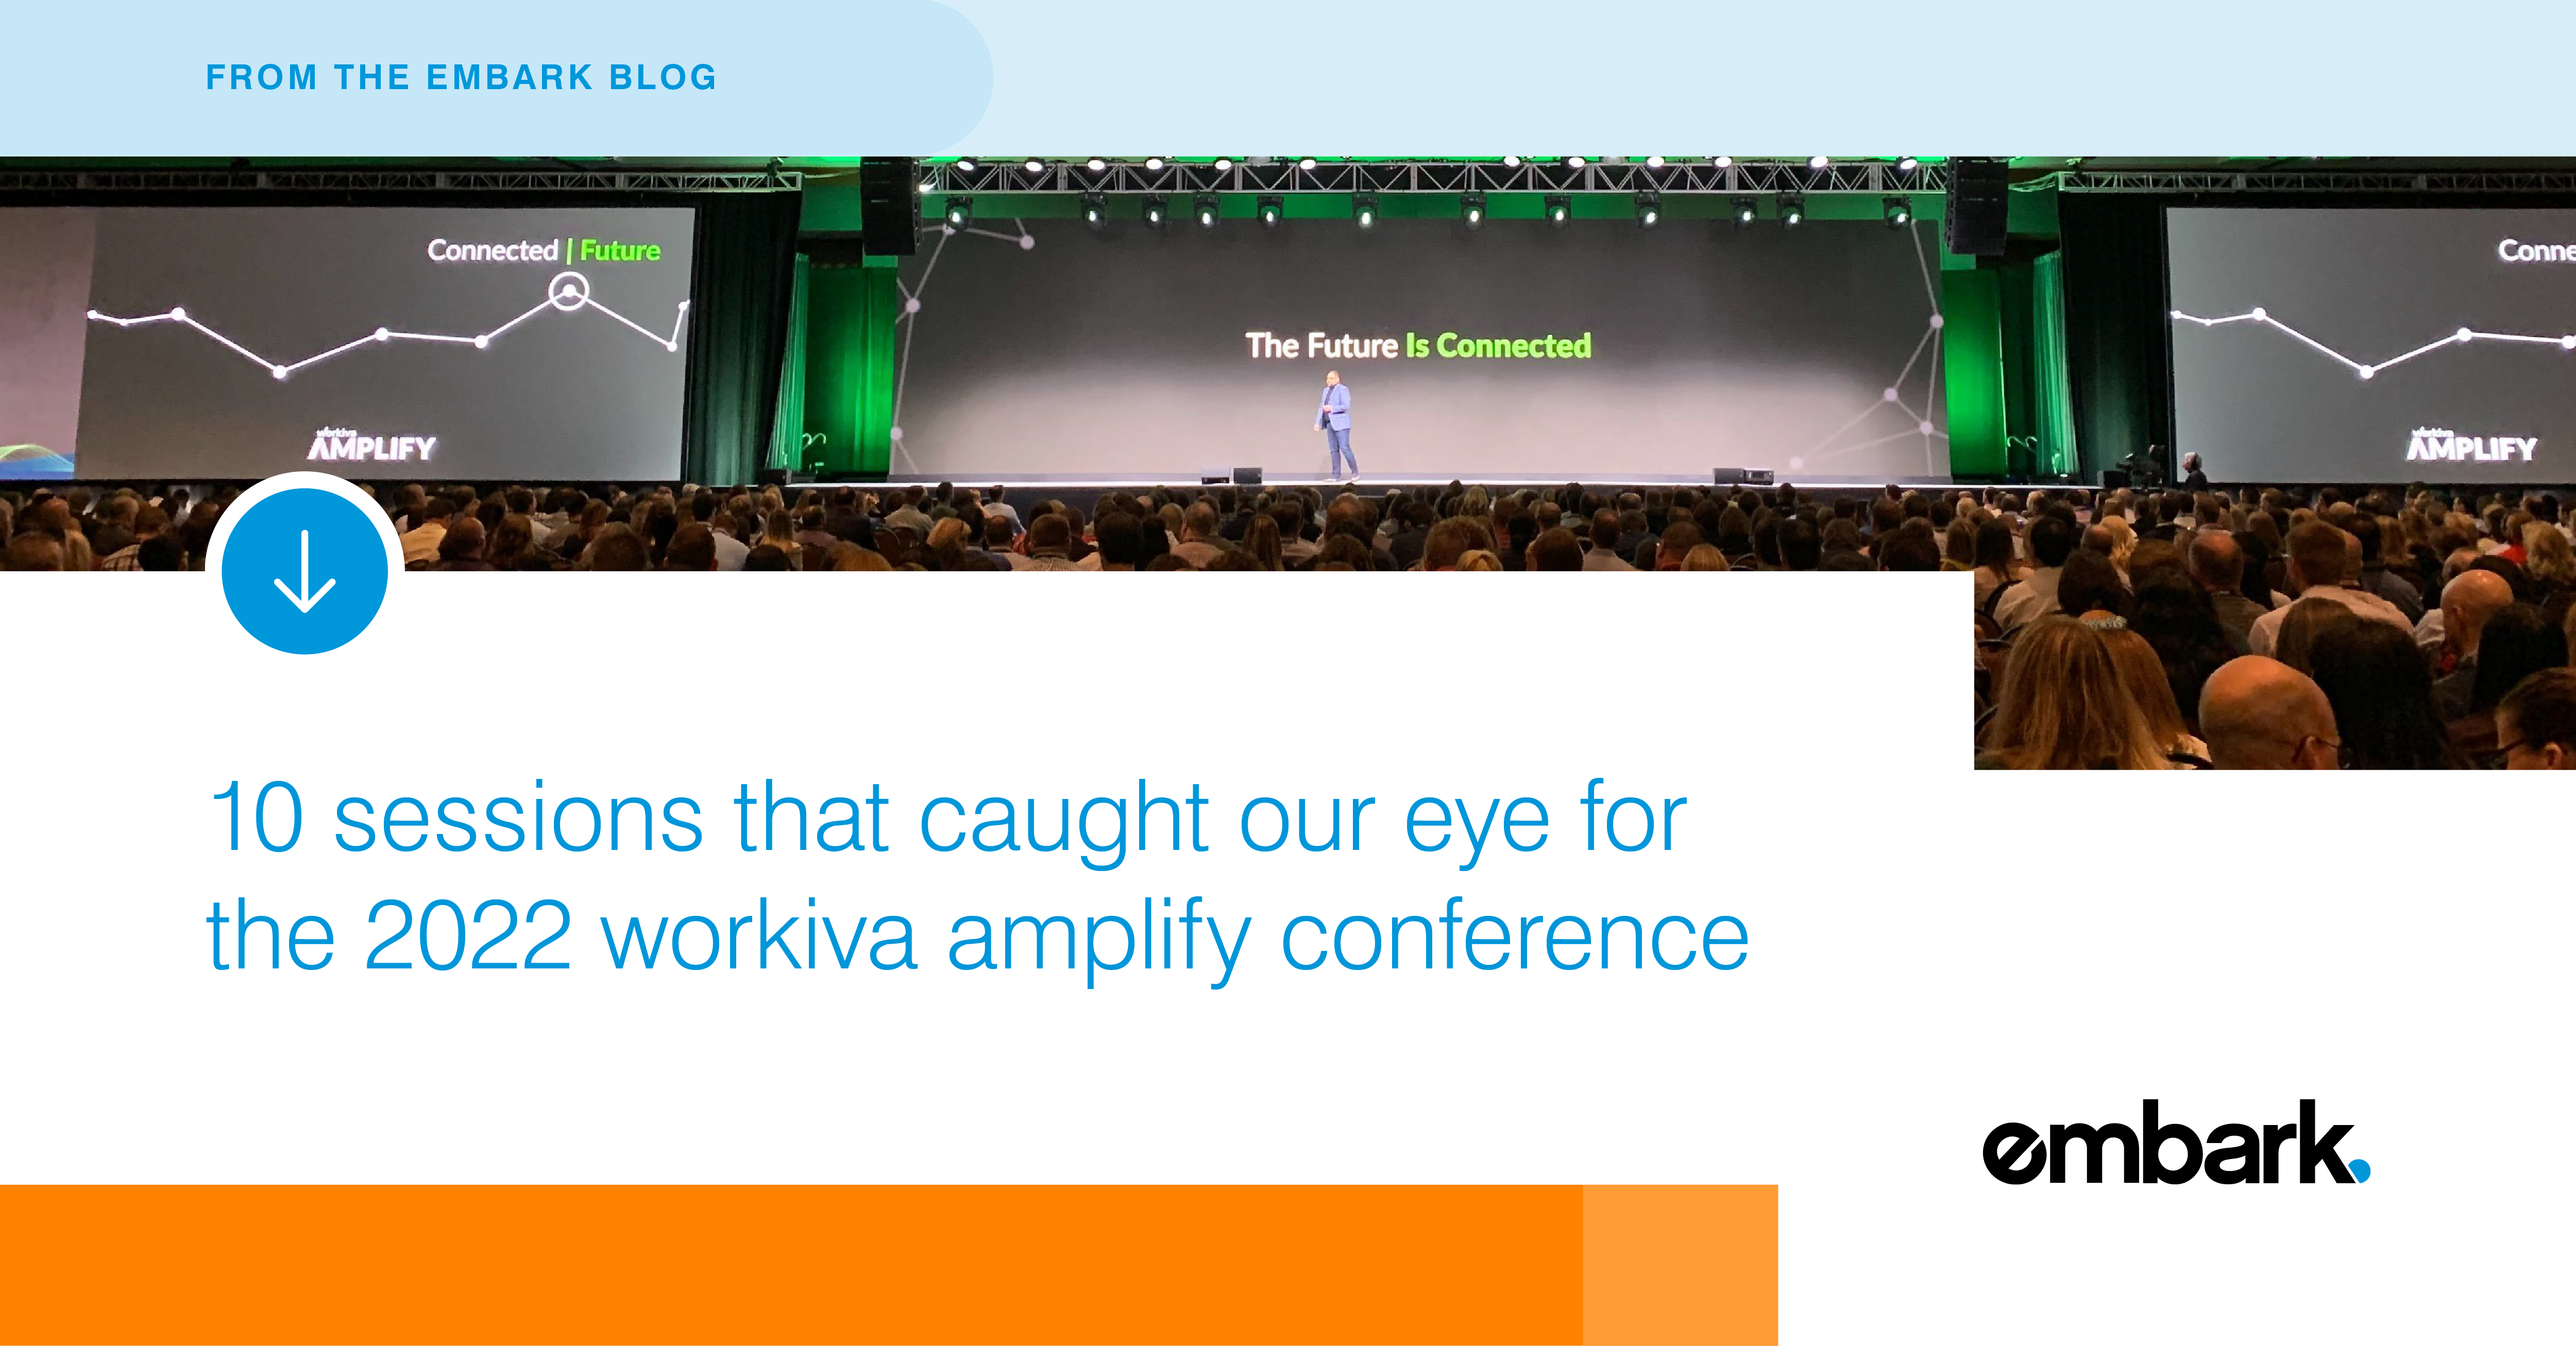 10 Sessions That Caught Our Eye for the 2022 Workiva Amplify Conference